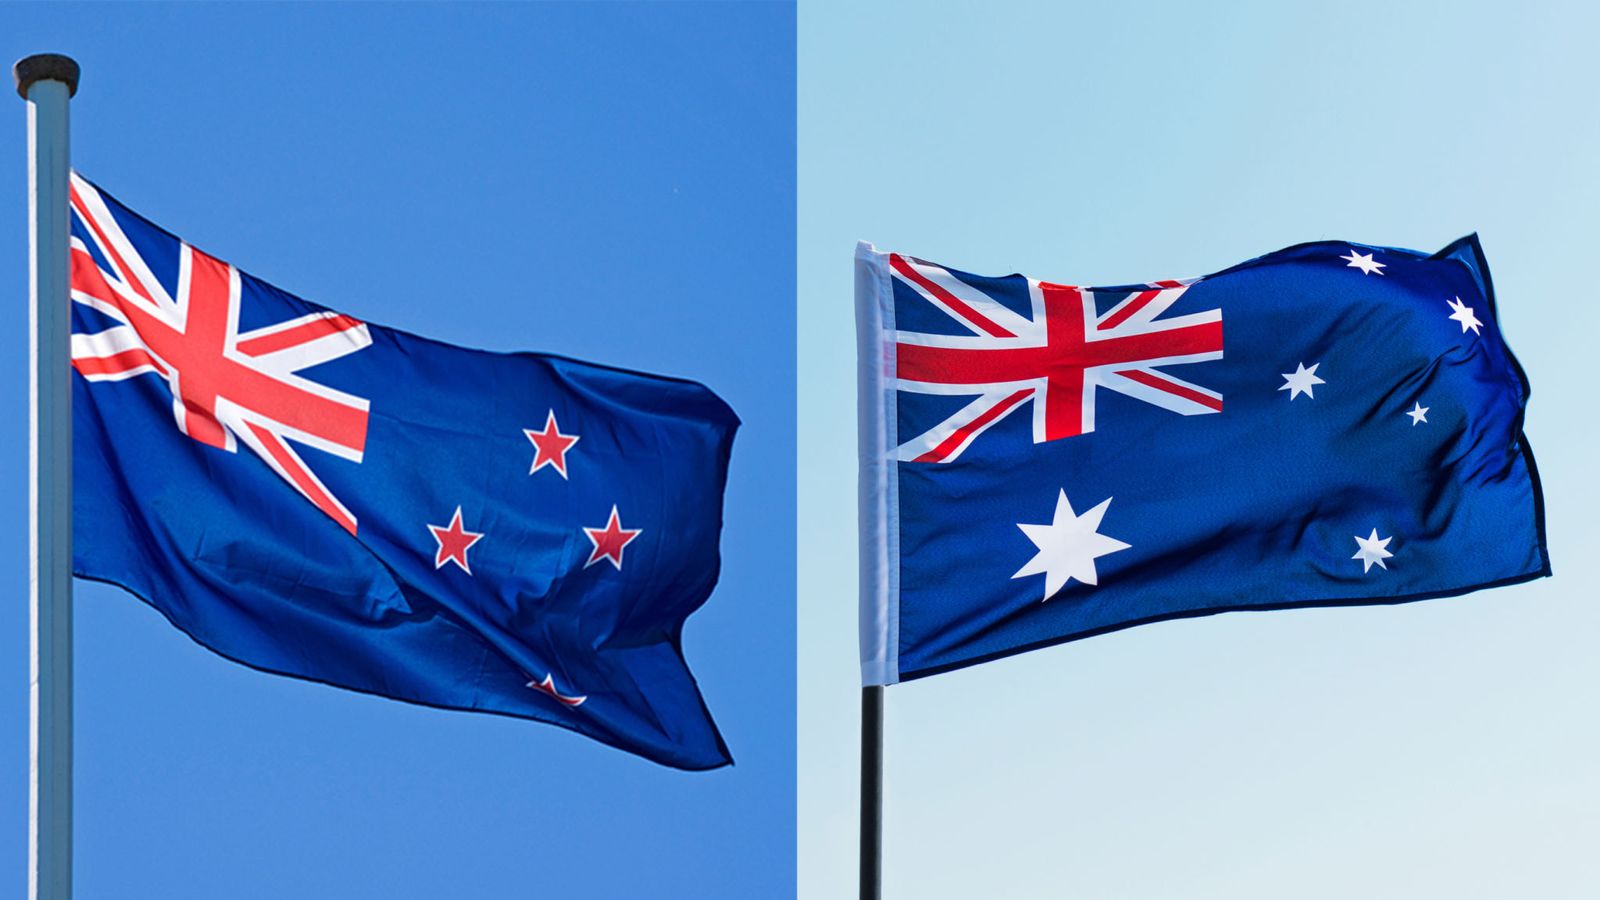 The New Zealand Flag, Left, Was Adopted In 1902, While - Difference In Flags Of Australia And New Zealand - HD Wallpaper 